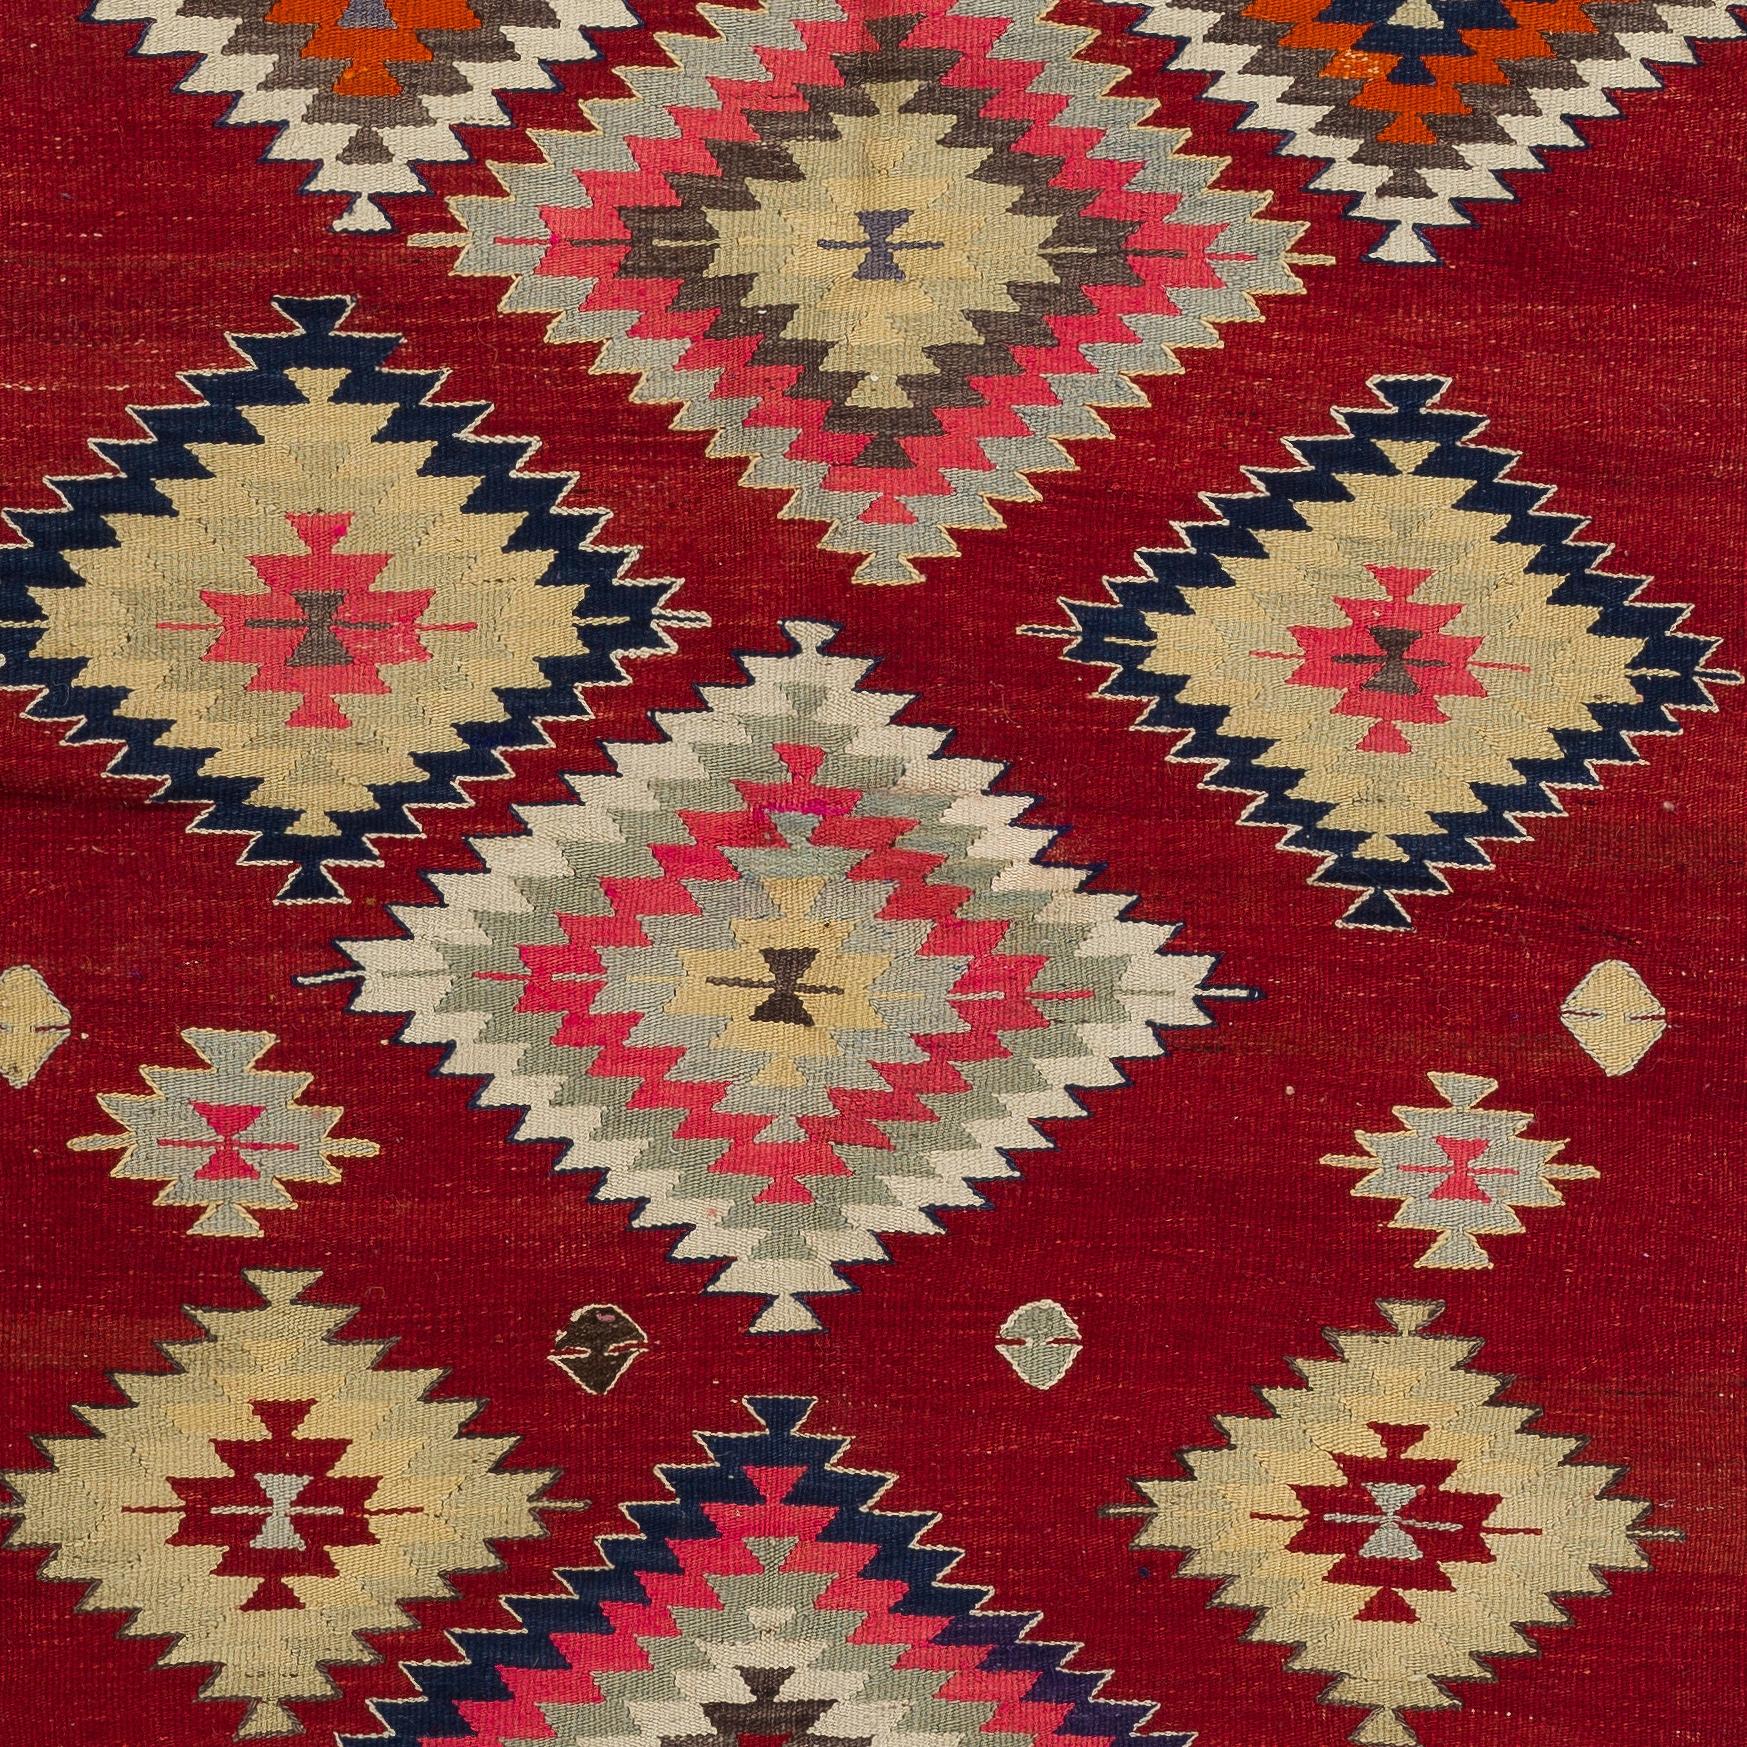 Hand-Woven 5.8x6.8 Ft Vintage Anatolian Kilim Rug in Red with Geometric Design, 100% Wool For Sale